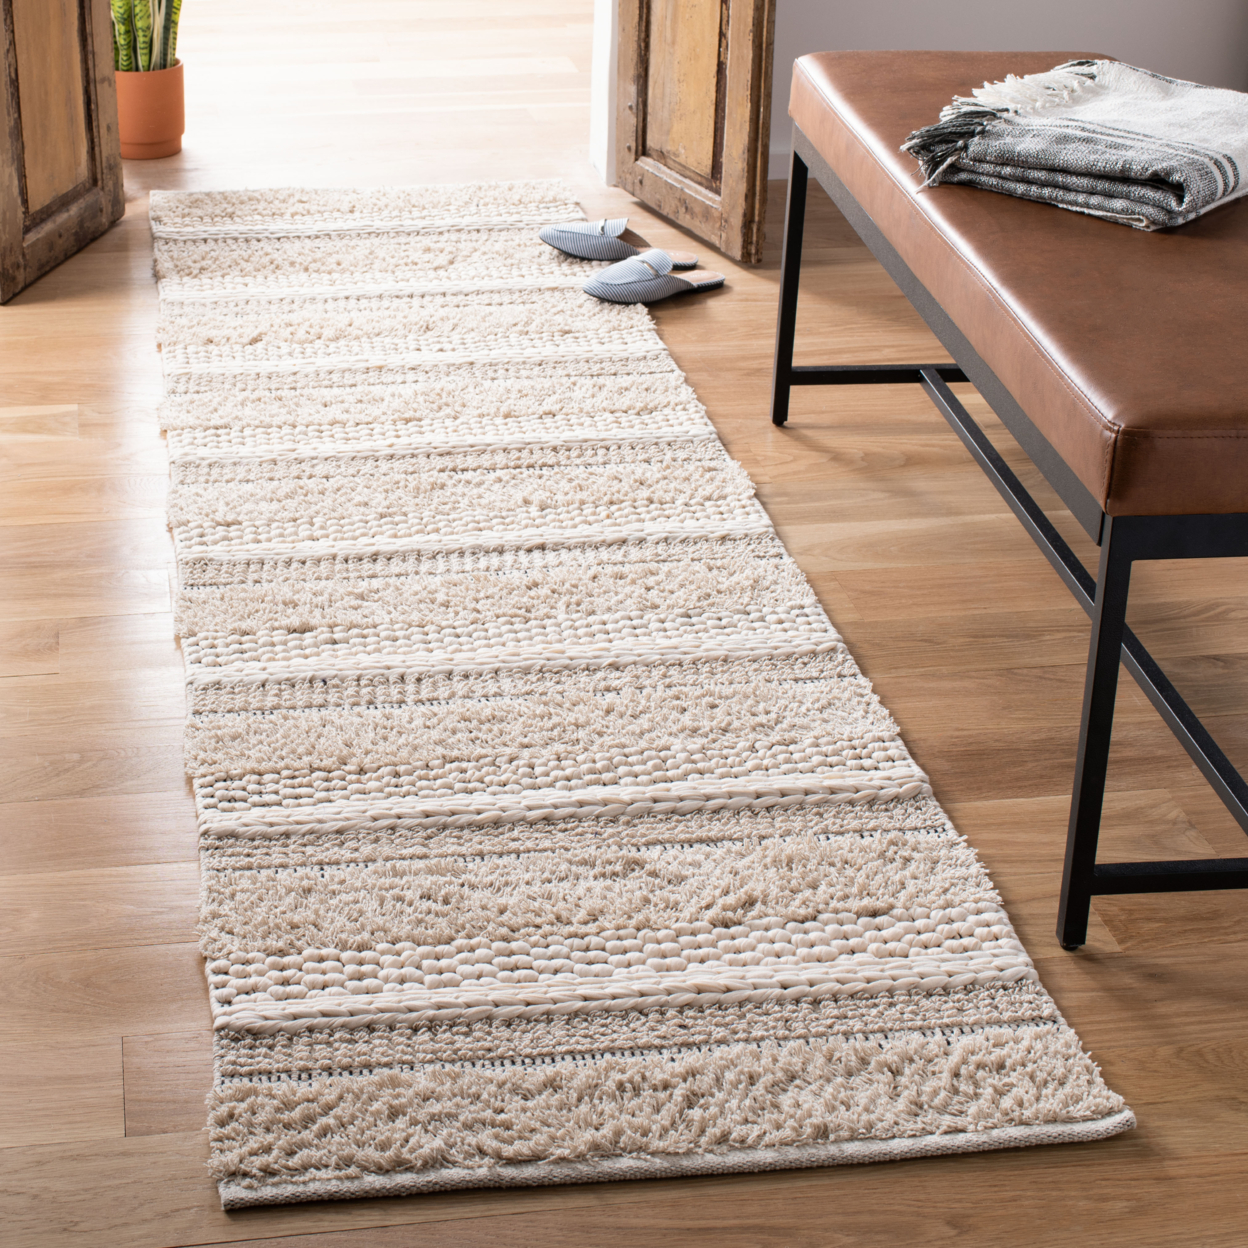 SAFAVIEH Natura Collection NAT651A Handwoven Ivory Rug - 2' 3 X 12'